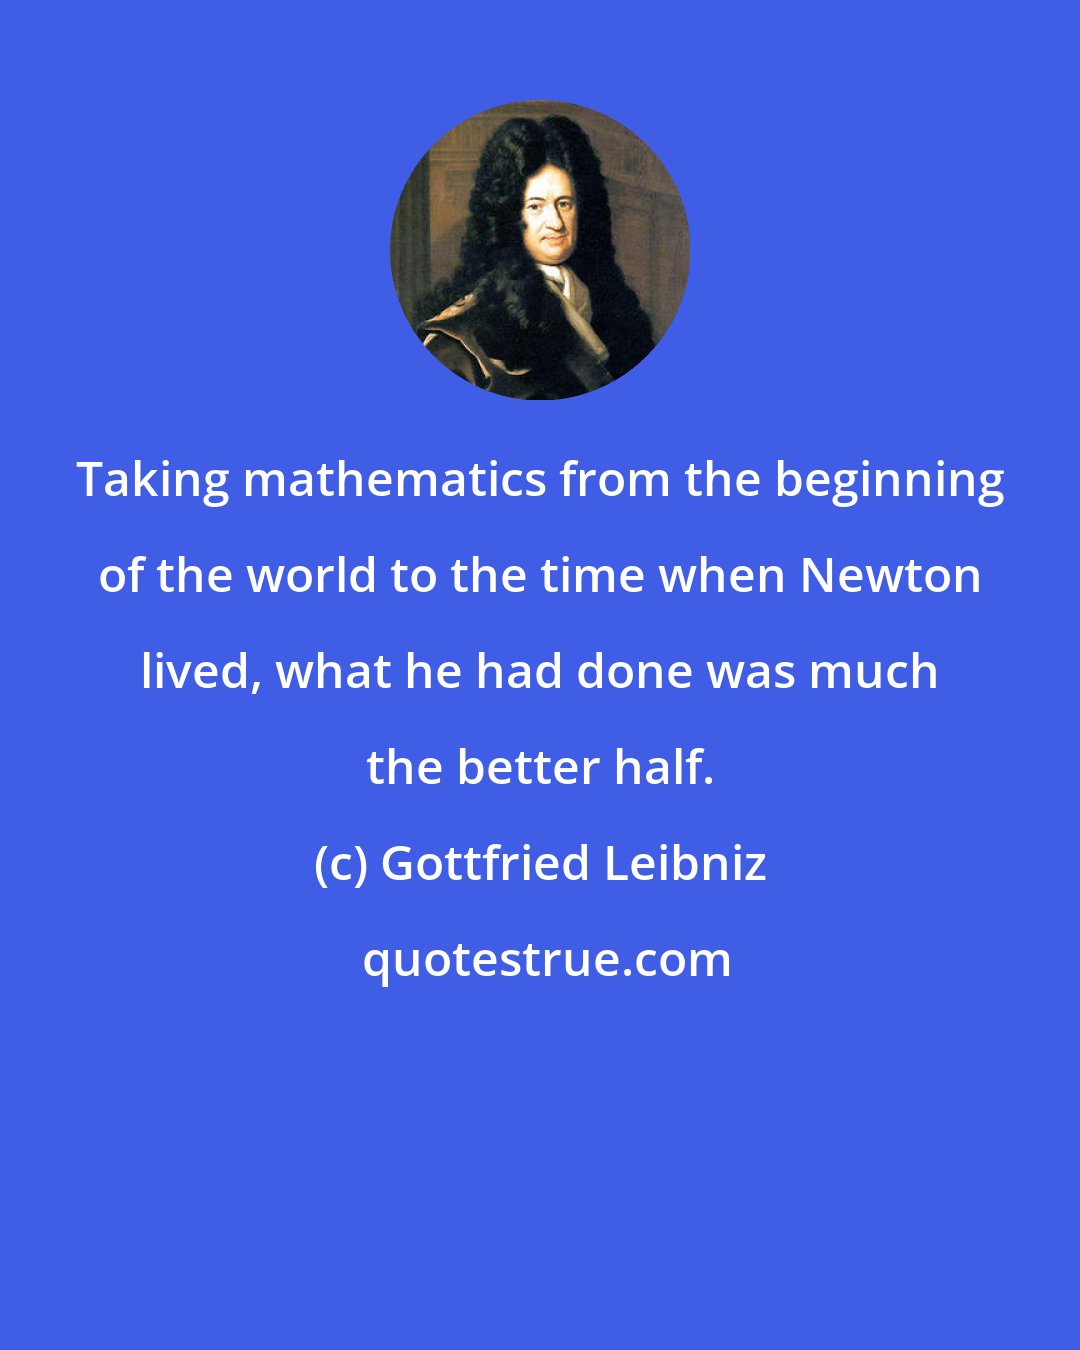 Gottfried Leibniz: Taking mathematics from the beginning of the world to the time when Newton lived, what he had done was much the better half.